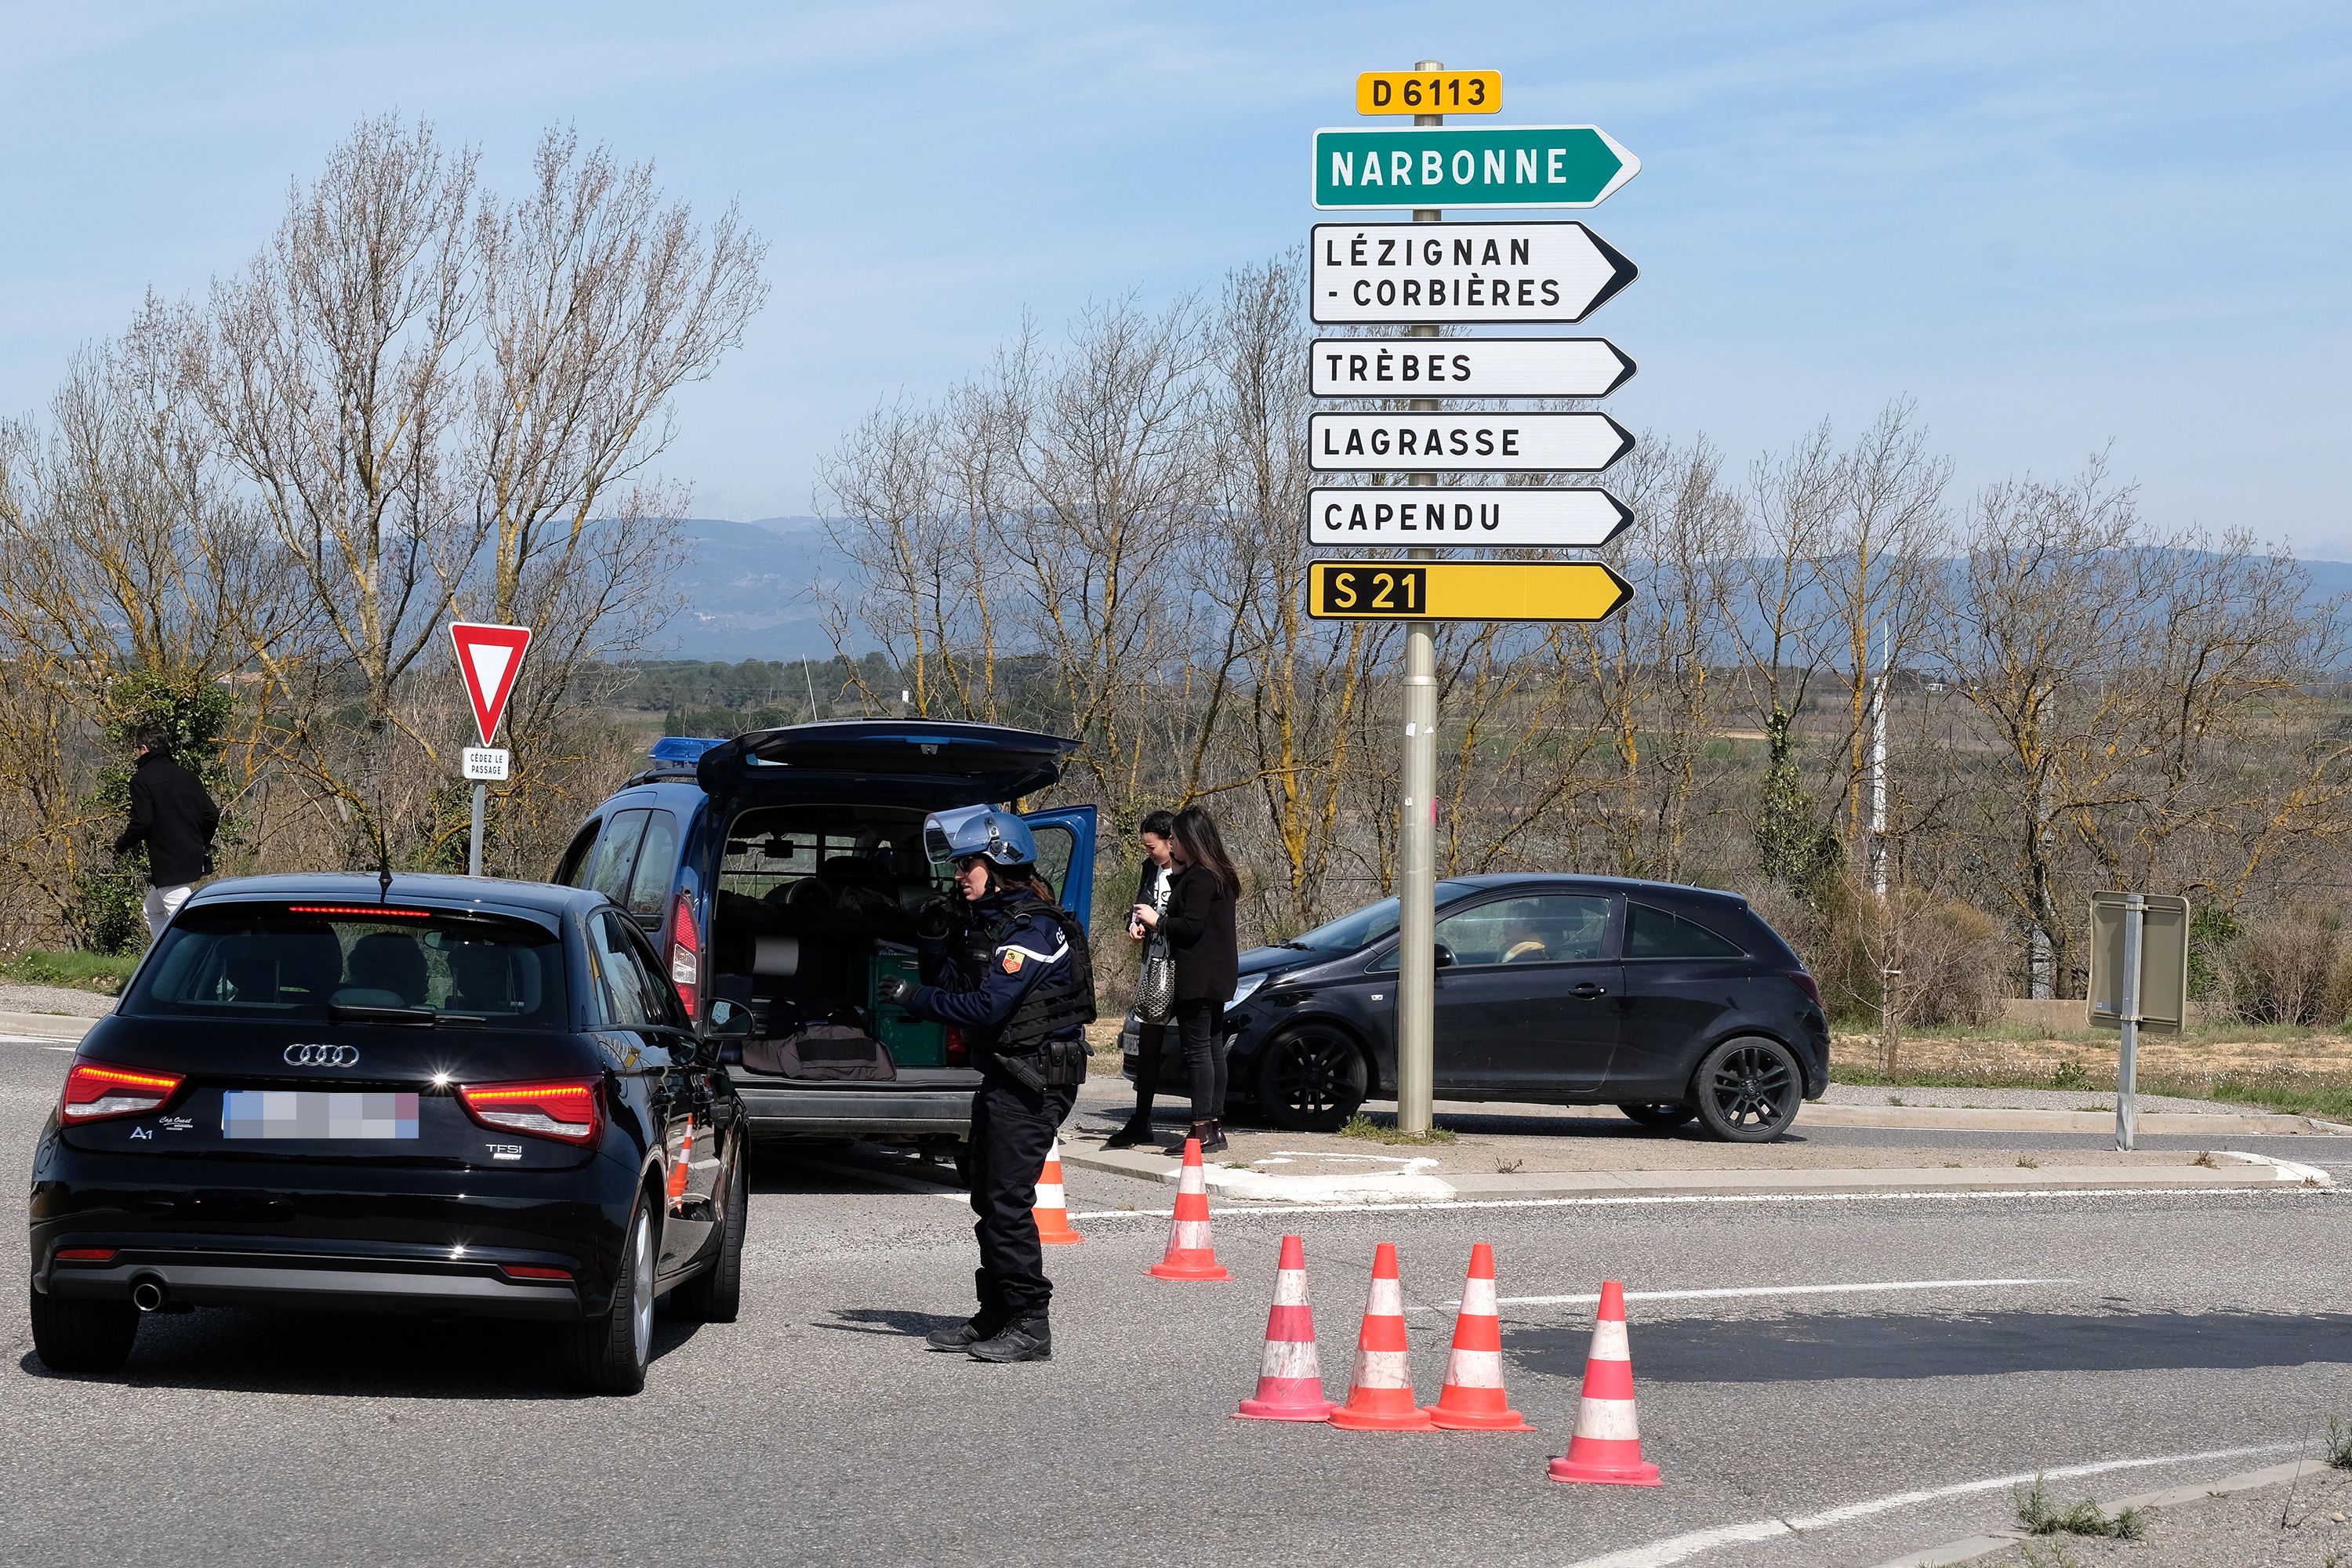 French gendarmes block the access to Trebes, where a man took hostages at a supermarket on March 23, 2018 in Trebes, southwest France. At least one person was feared dead after a gunman claiming allegiance to the Islamic State group fired shots in a hostage-taking at a supermarket in southwest France, police said. / AFP PHOTO / ERIC CABANIS (ERIC CABANIS&mdash;AFP/Getty Images)